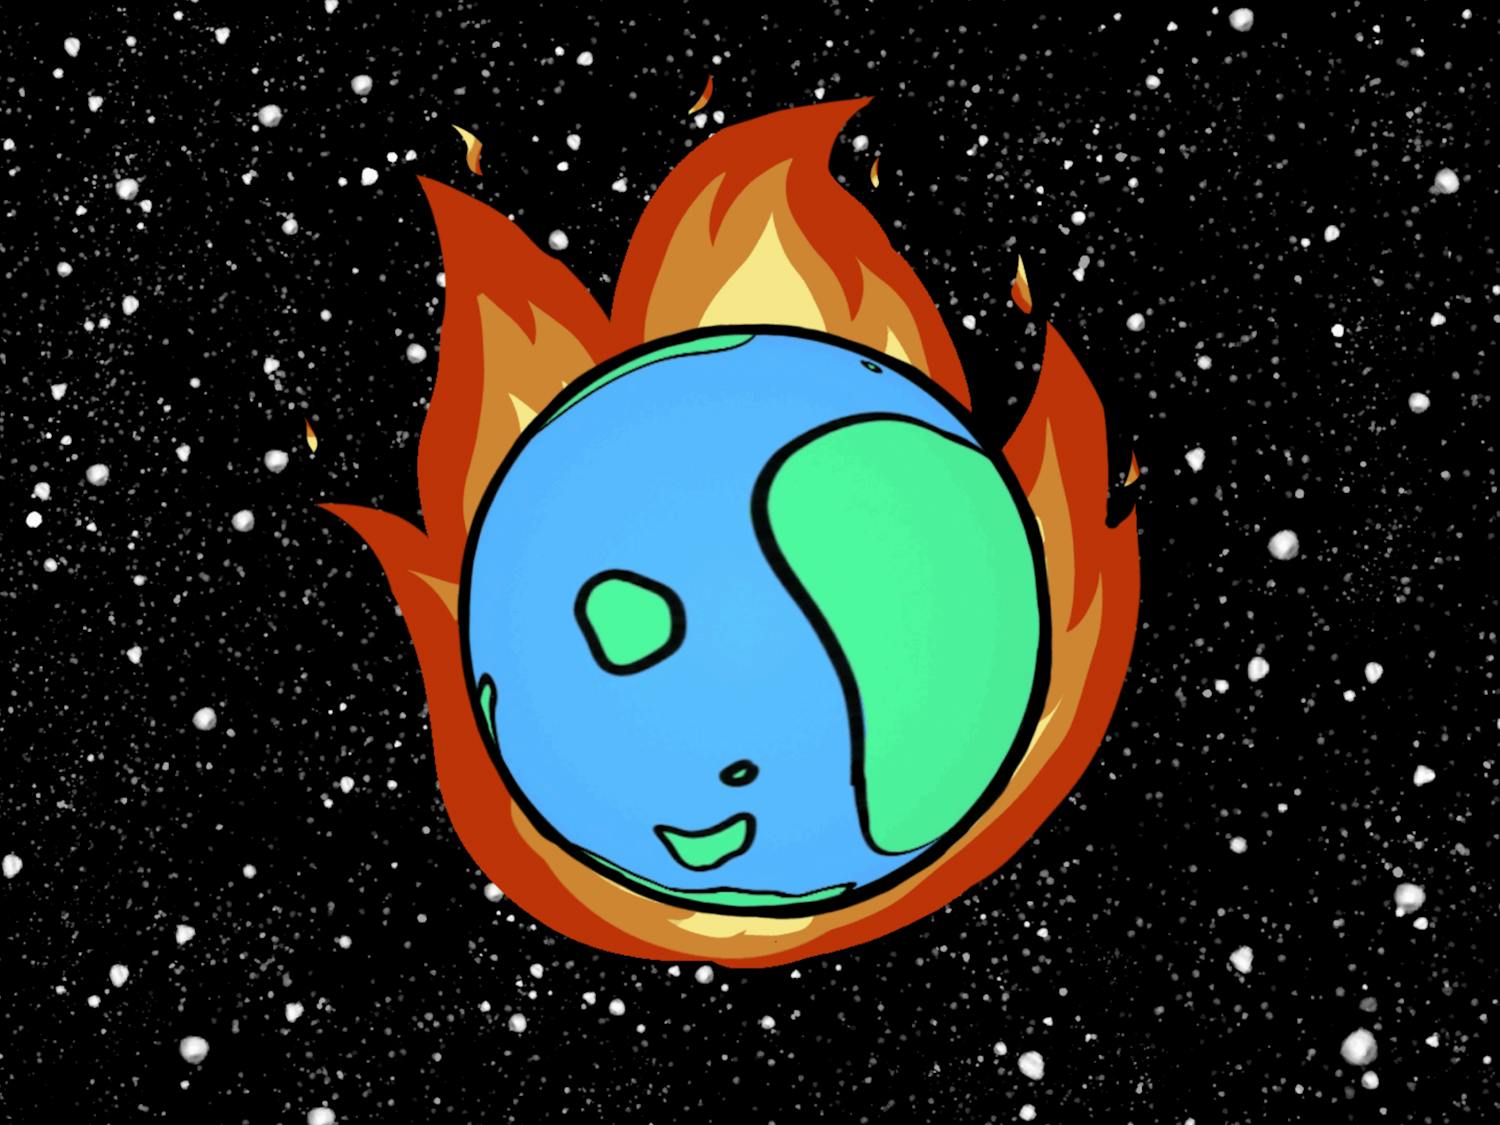 Globe on fire but at least its not a gif